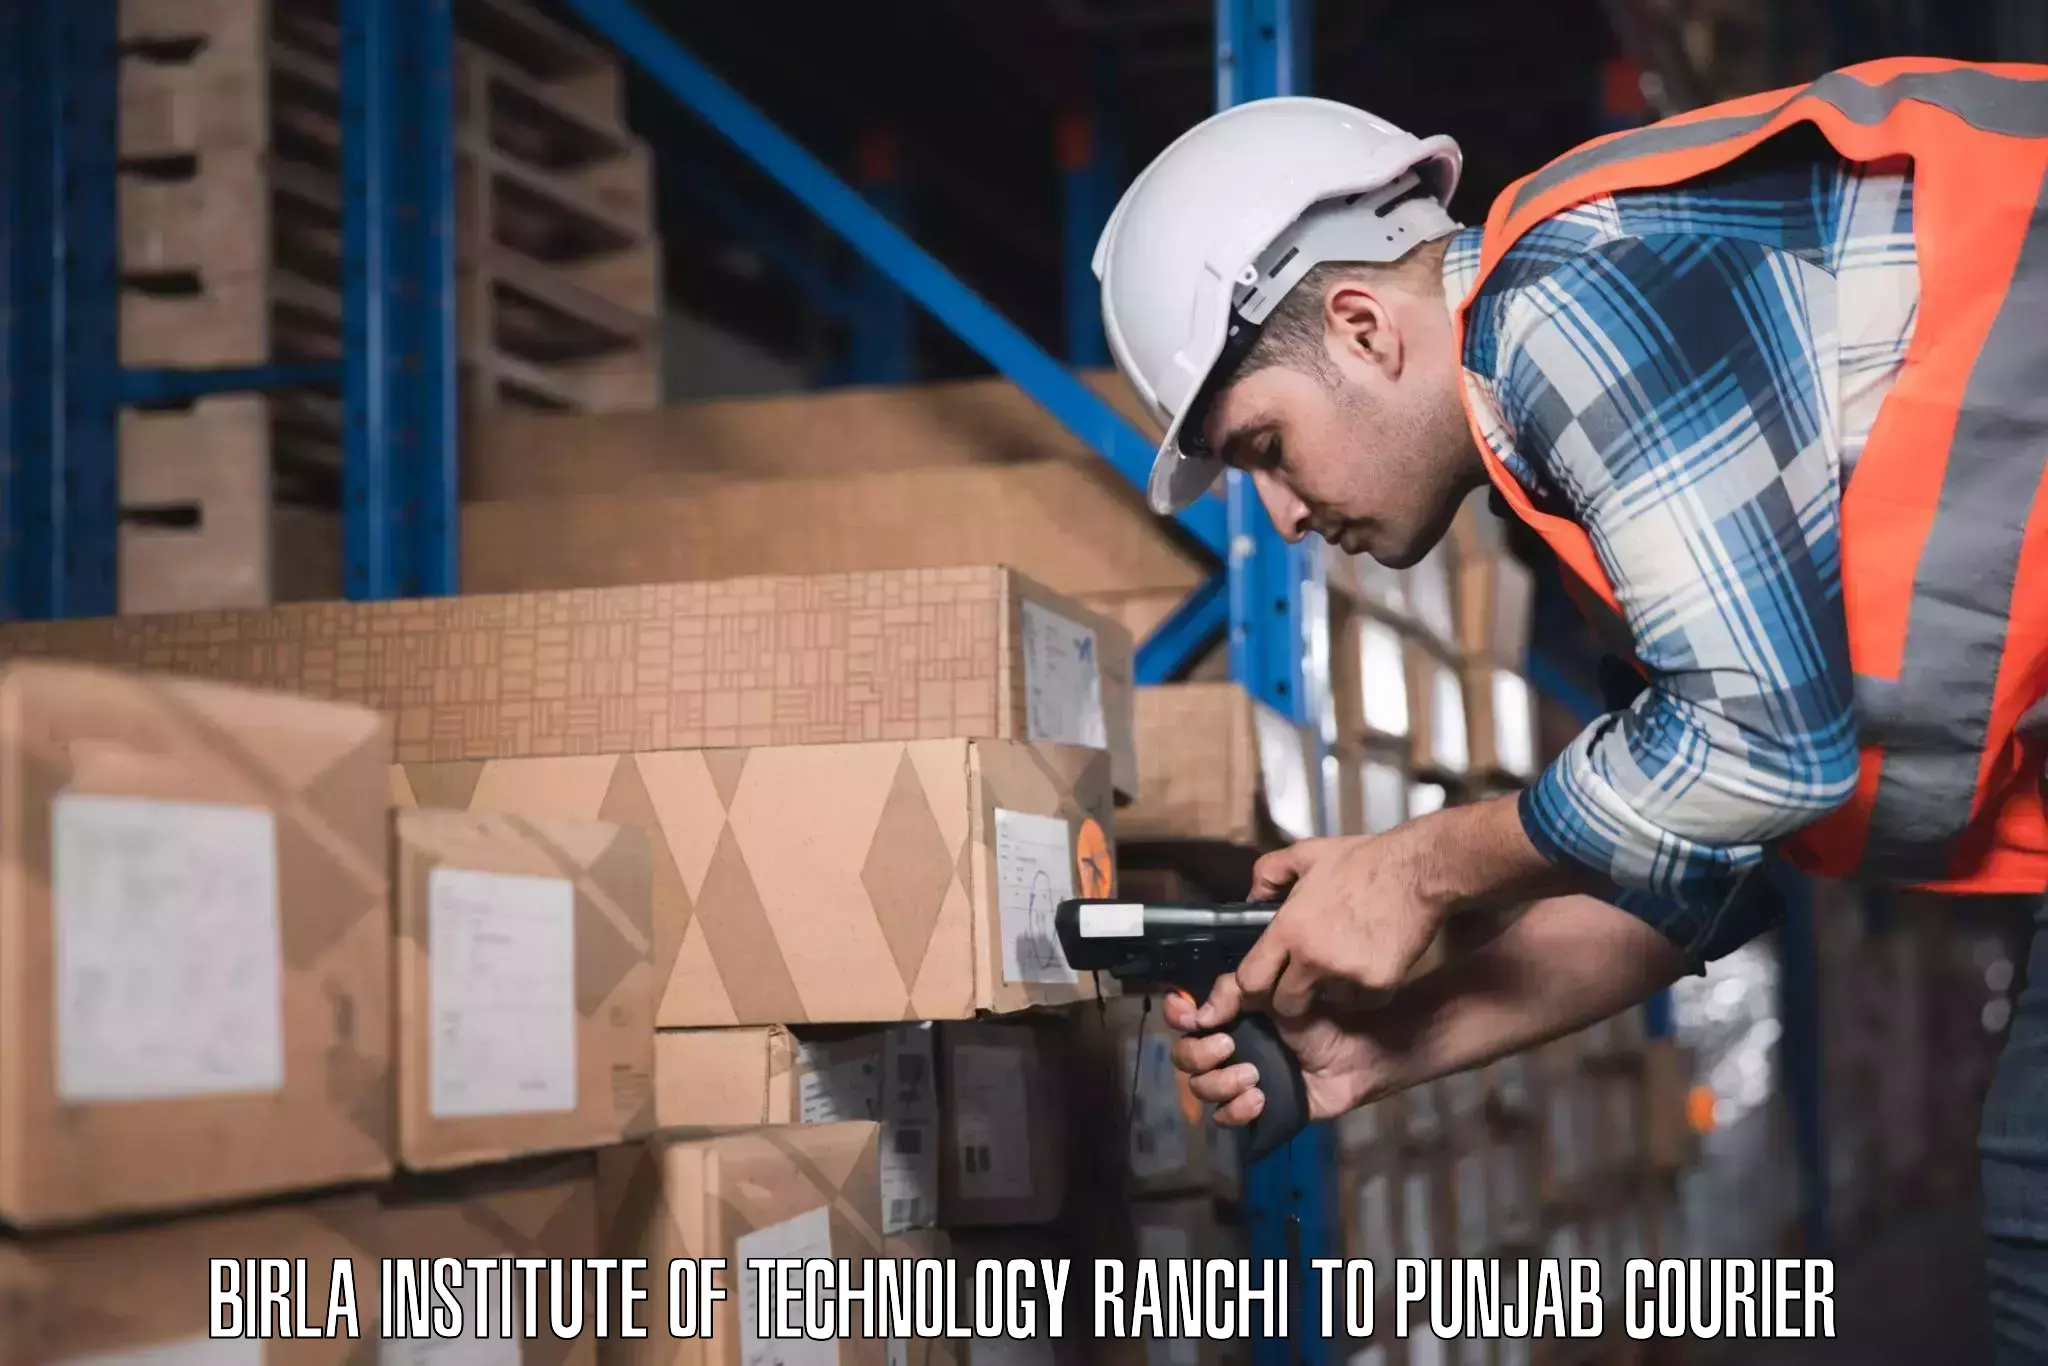 Luggage delivery system Birla Institute of Technology Ranchi to Jalandhar